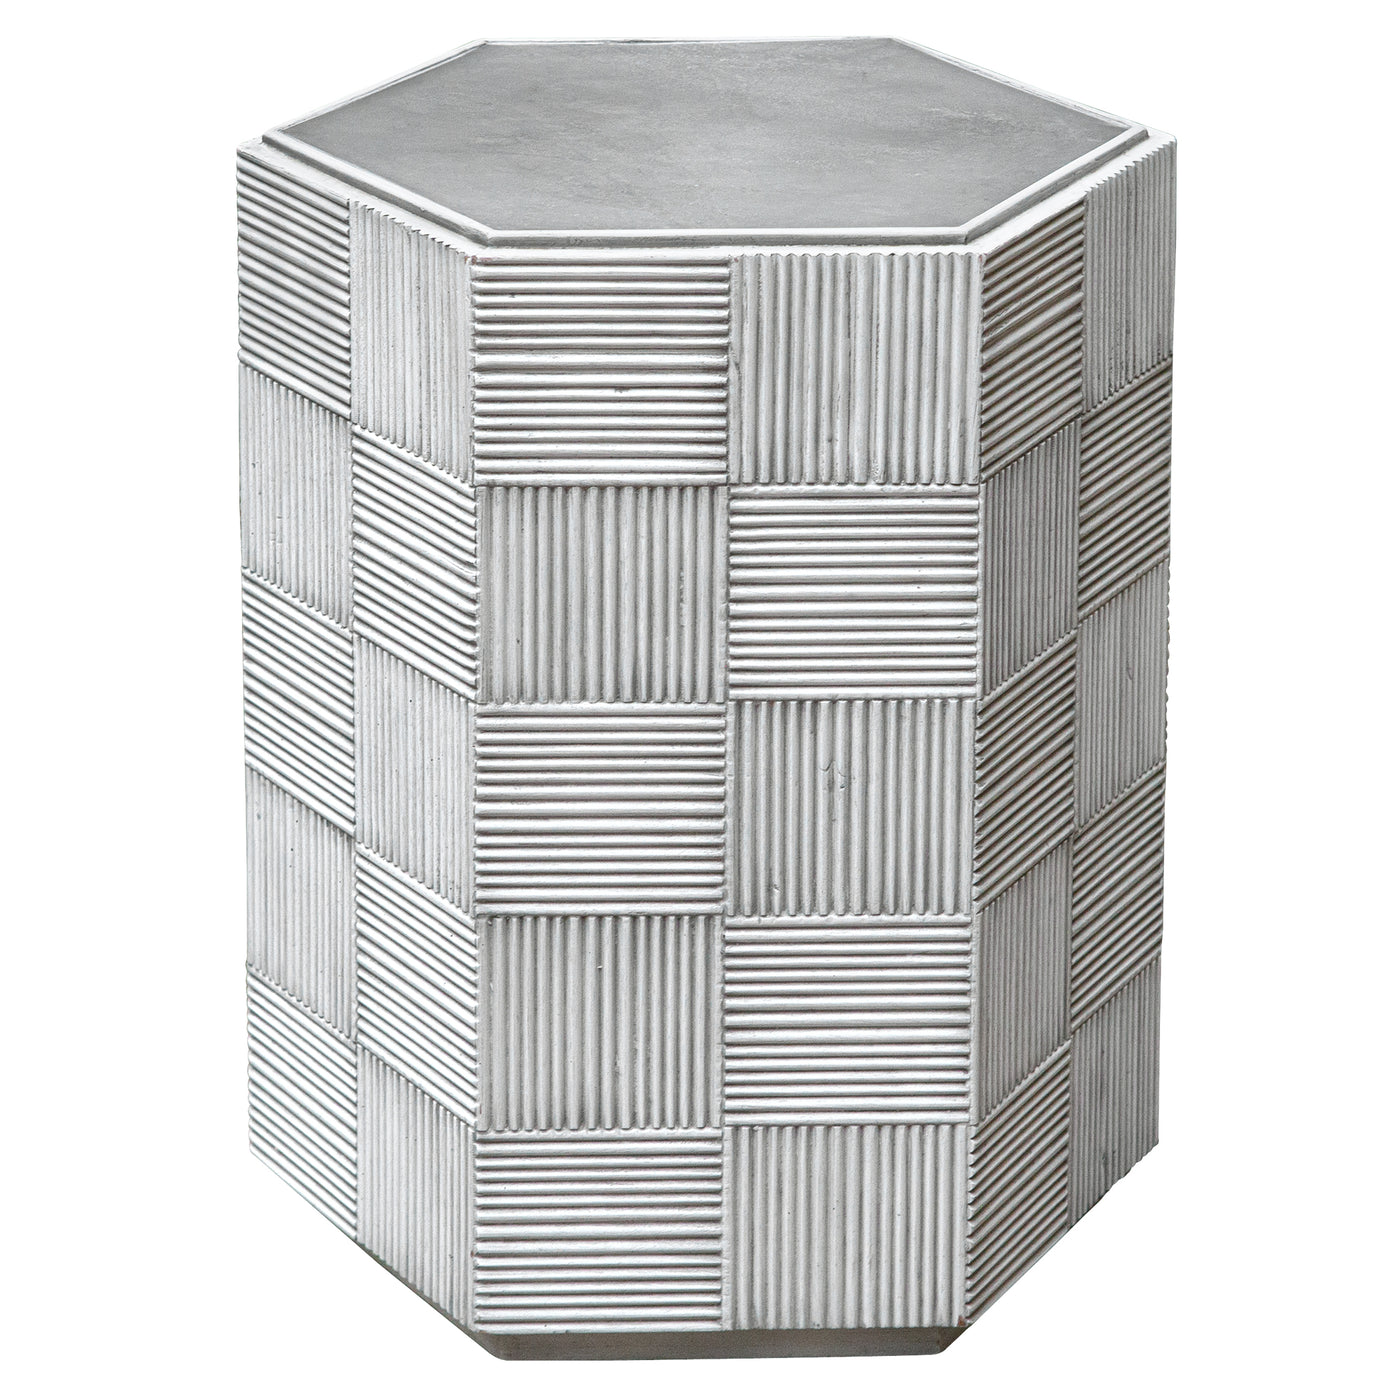 Solidly Constructed From Plantation-grown Mahogany Wood, This Hexagonal Accent Table Features A Reeded Tile Exterior Finis...